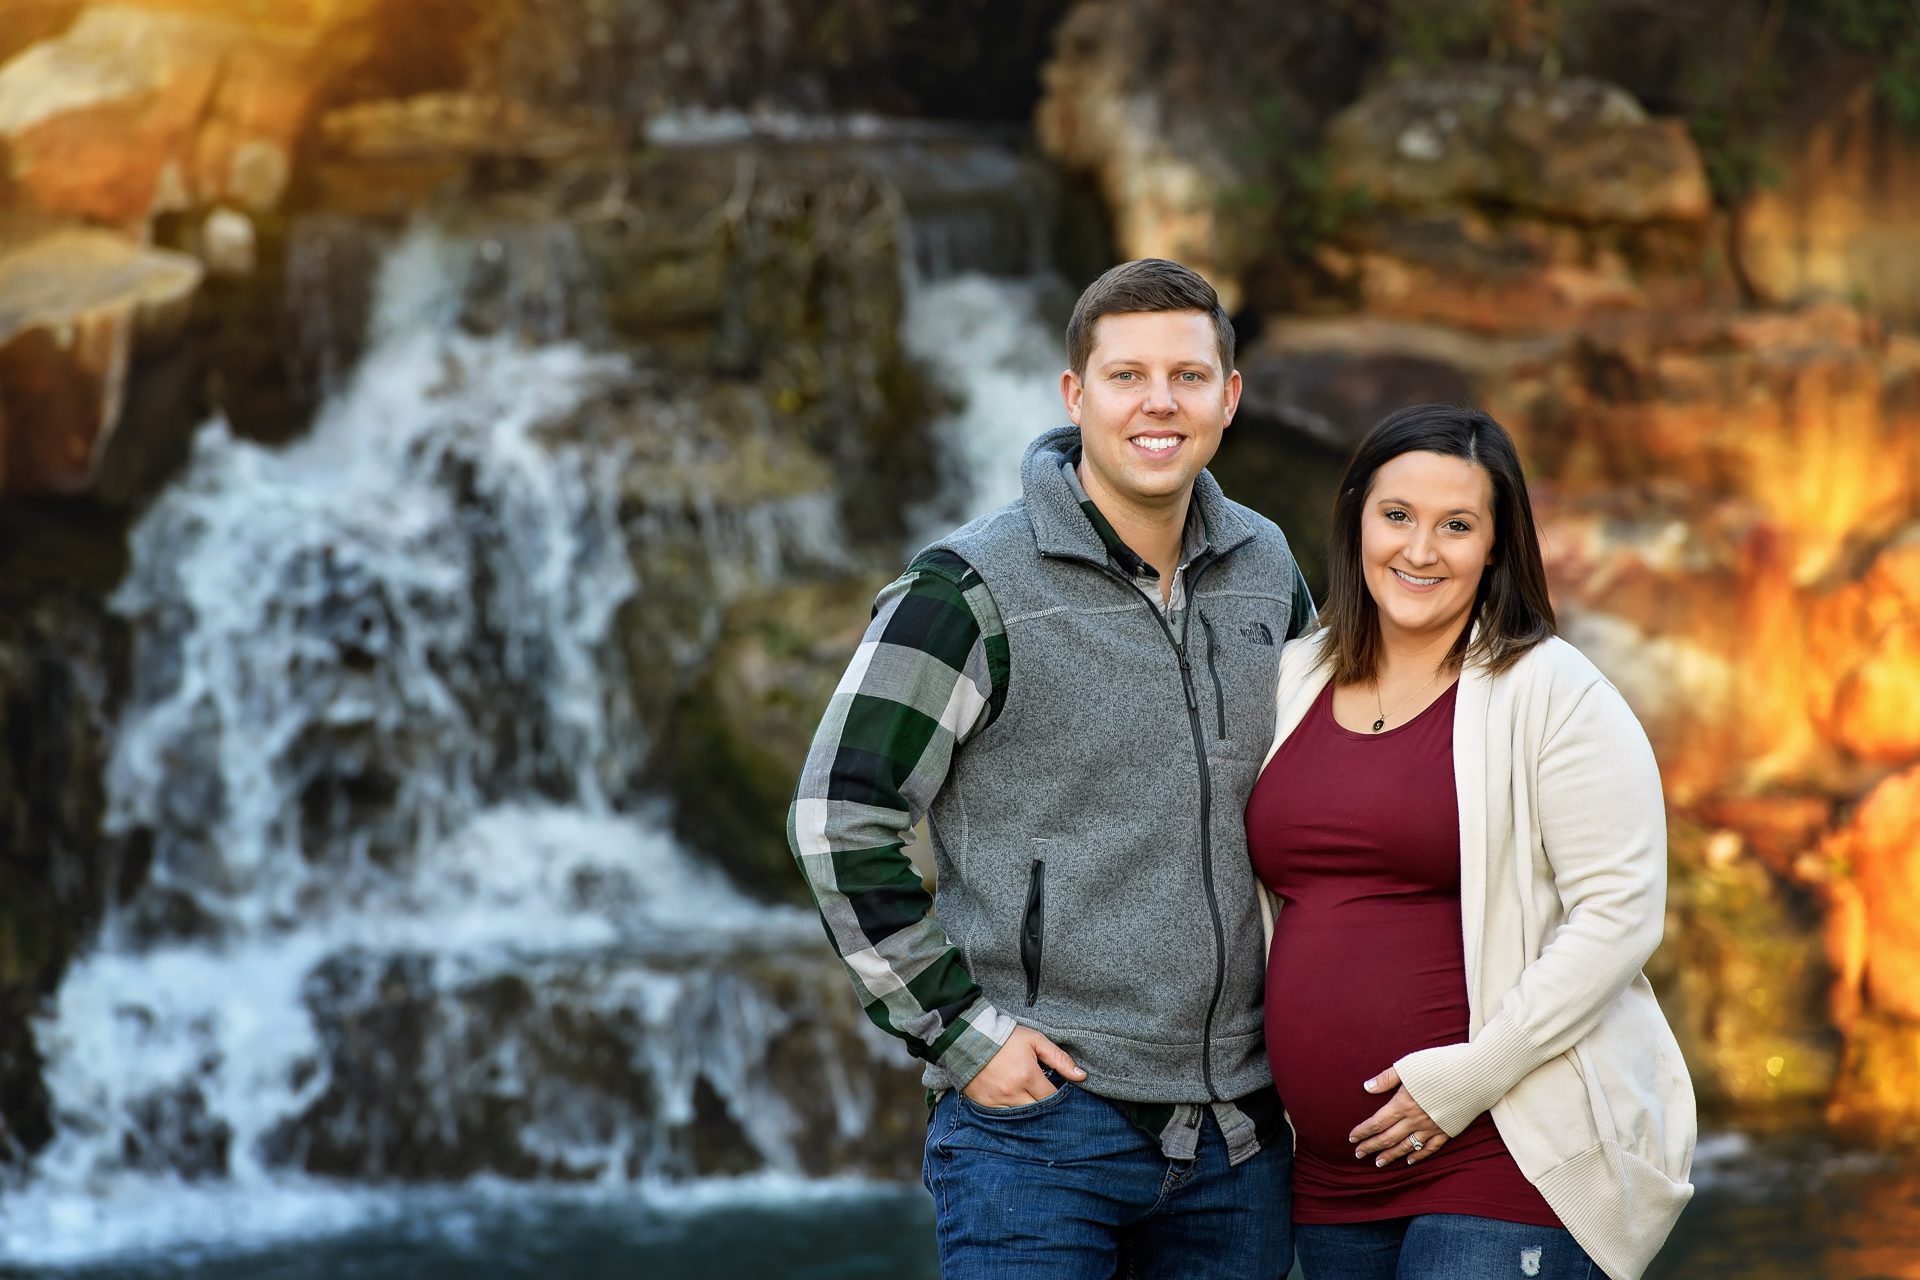 Parents-to-be posing for maternity photography - Natalie Roberson Photography